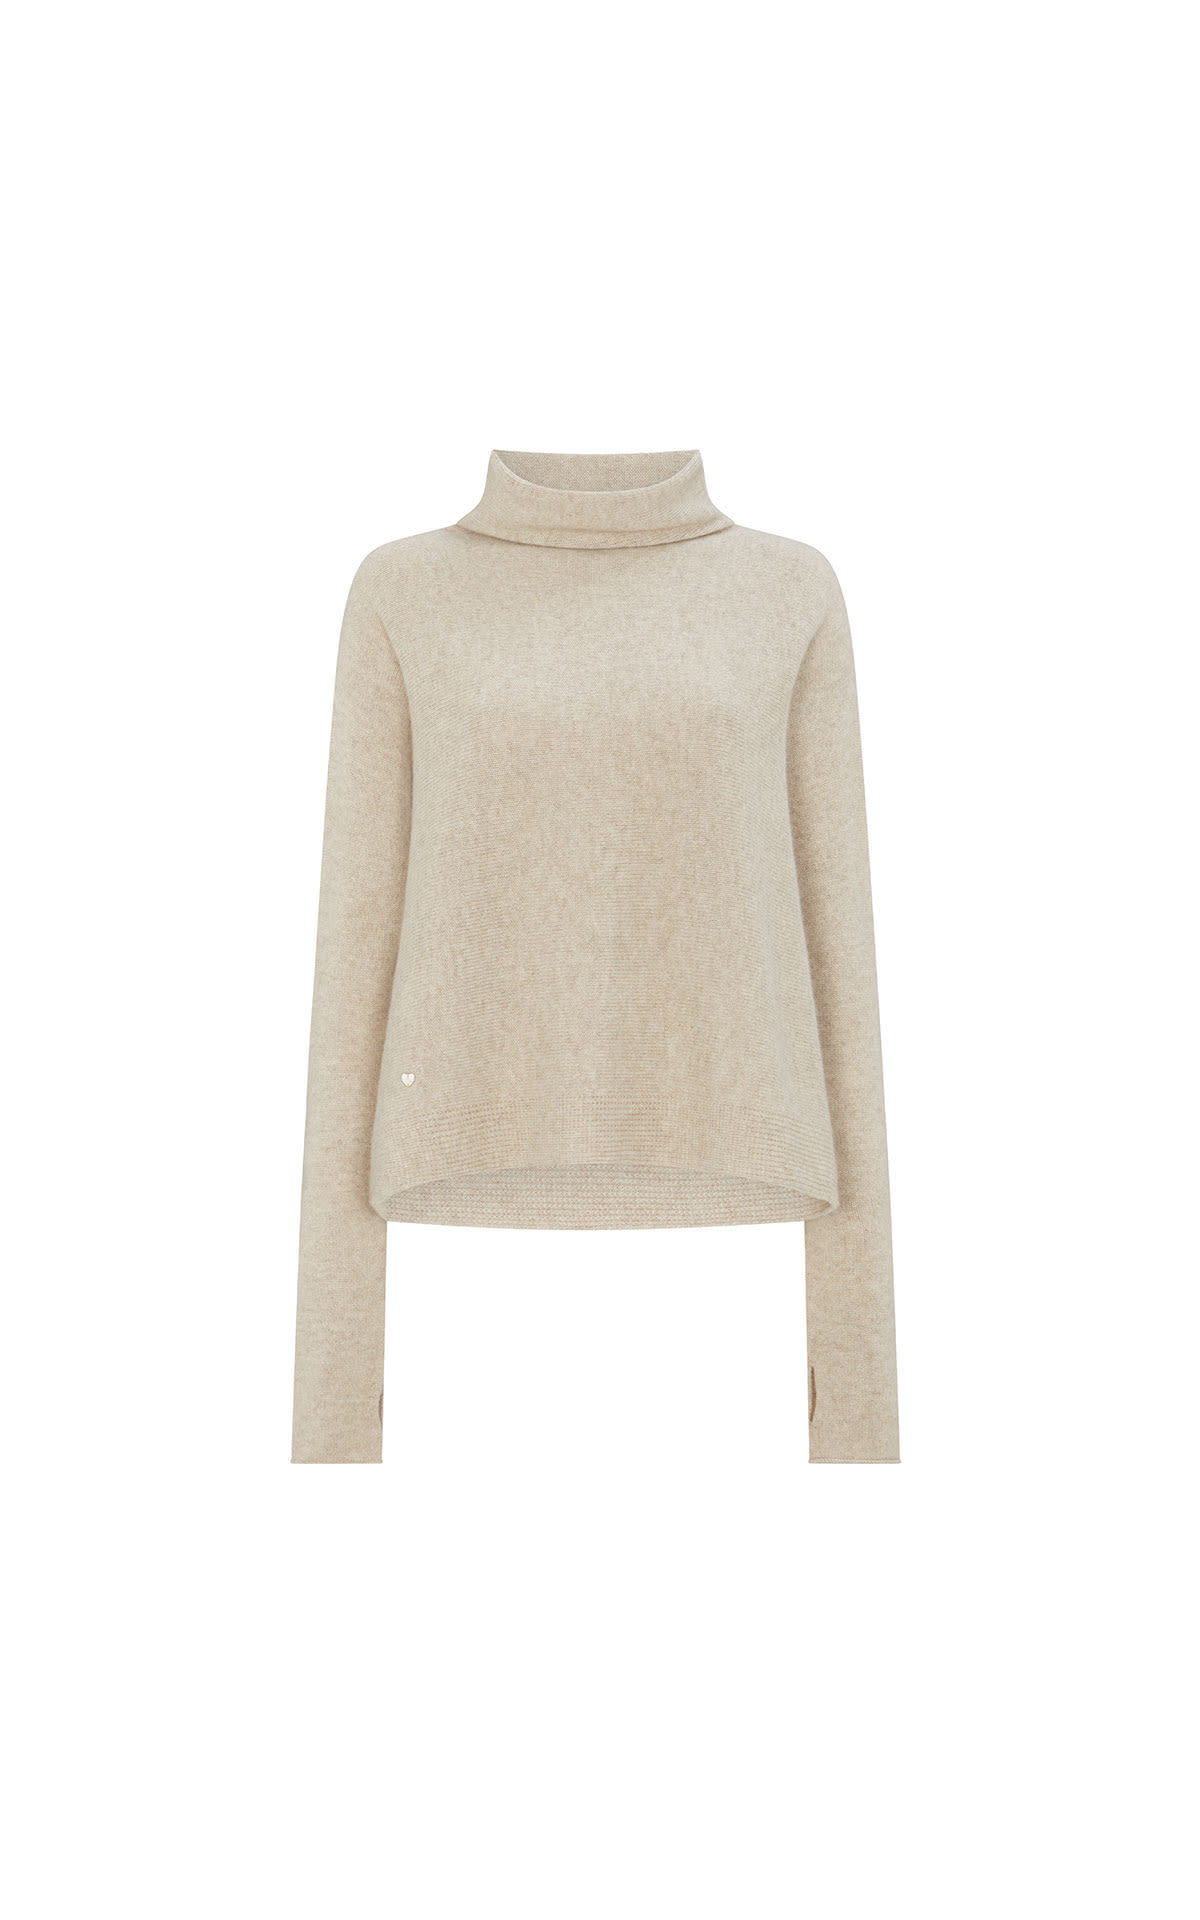 Bamford Retreat sweater natural front from Bicester Village